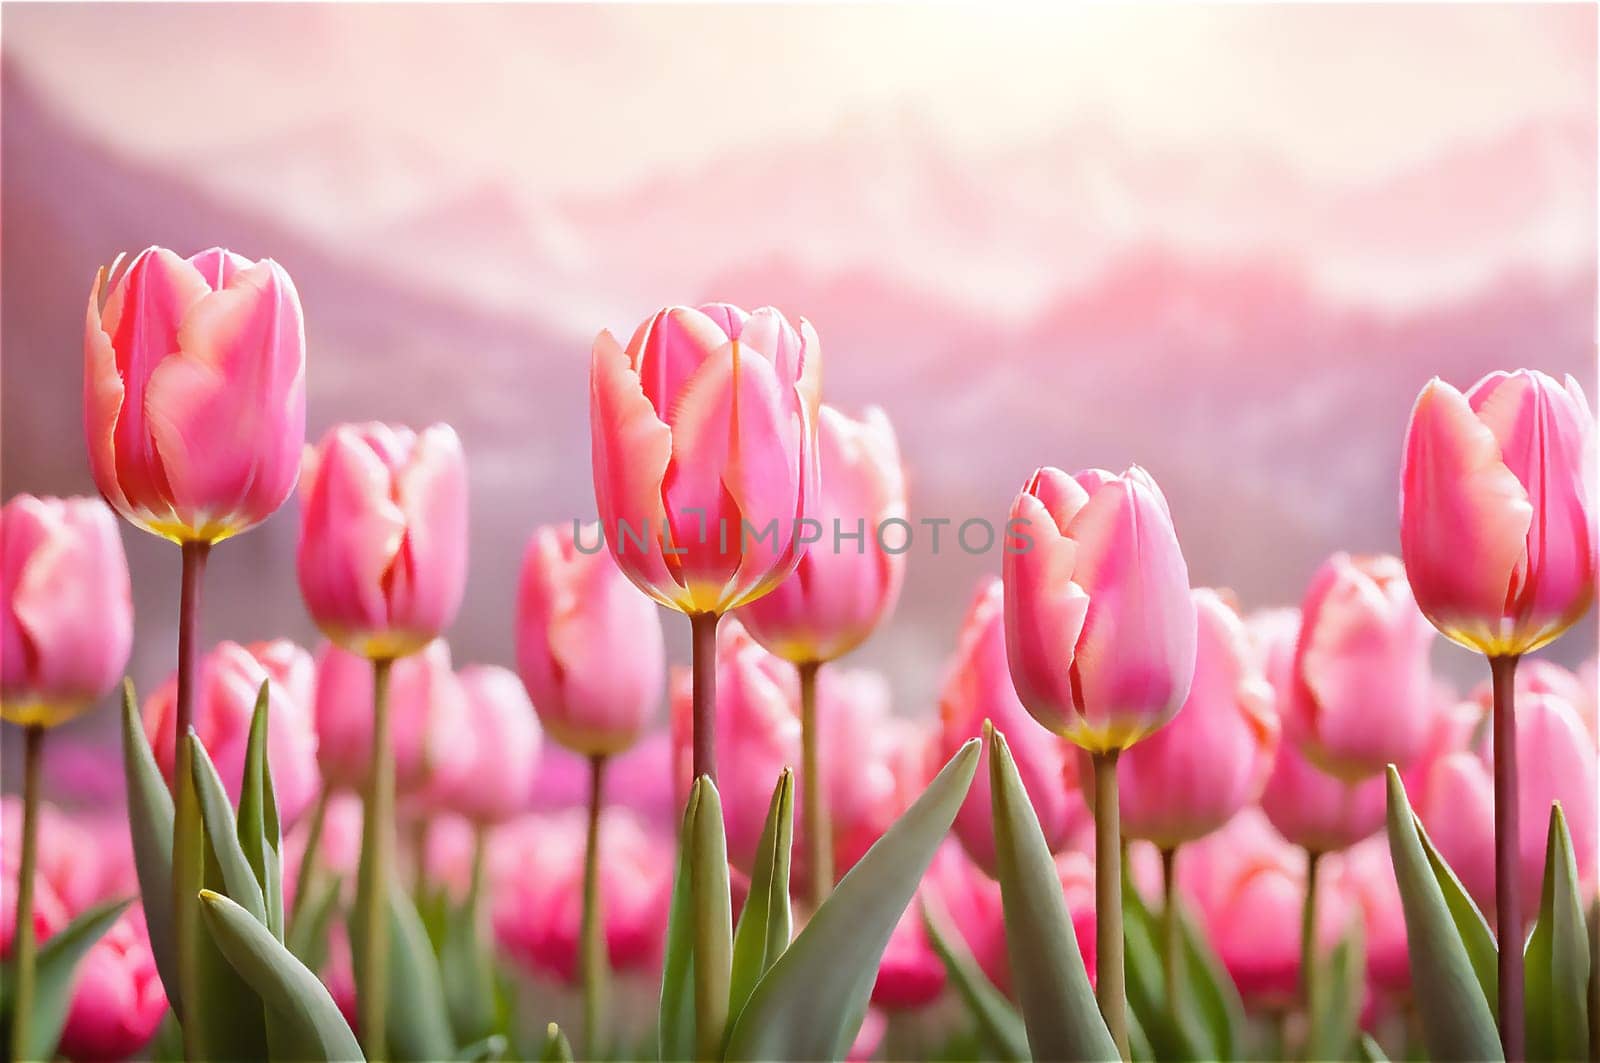 Field of pink tulips close-up on spring day against the backdrop mountains by EkaterinaPereslavtseva